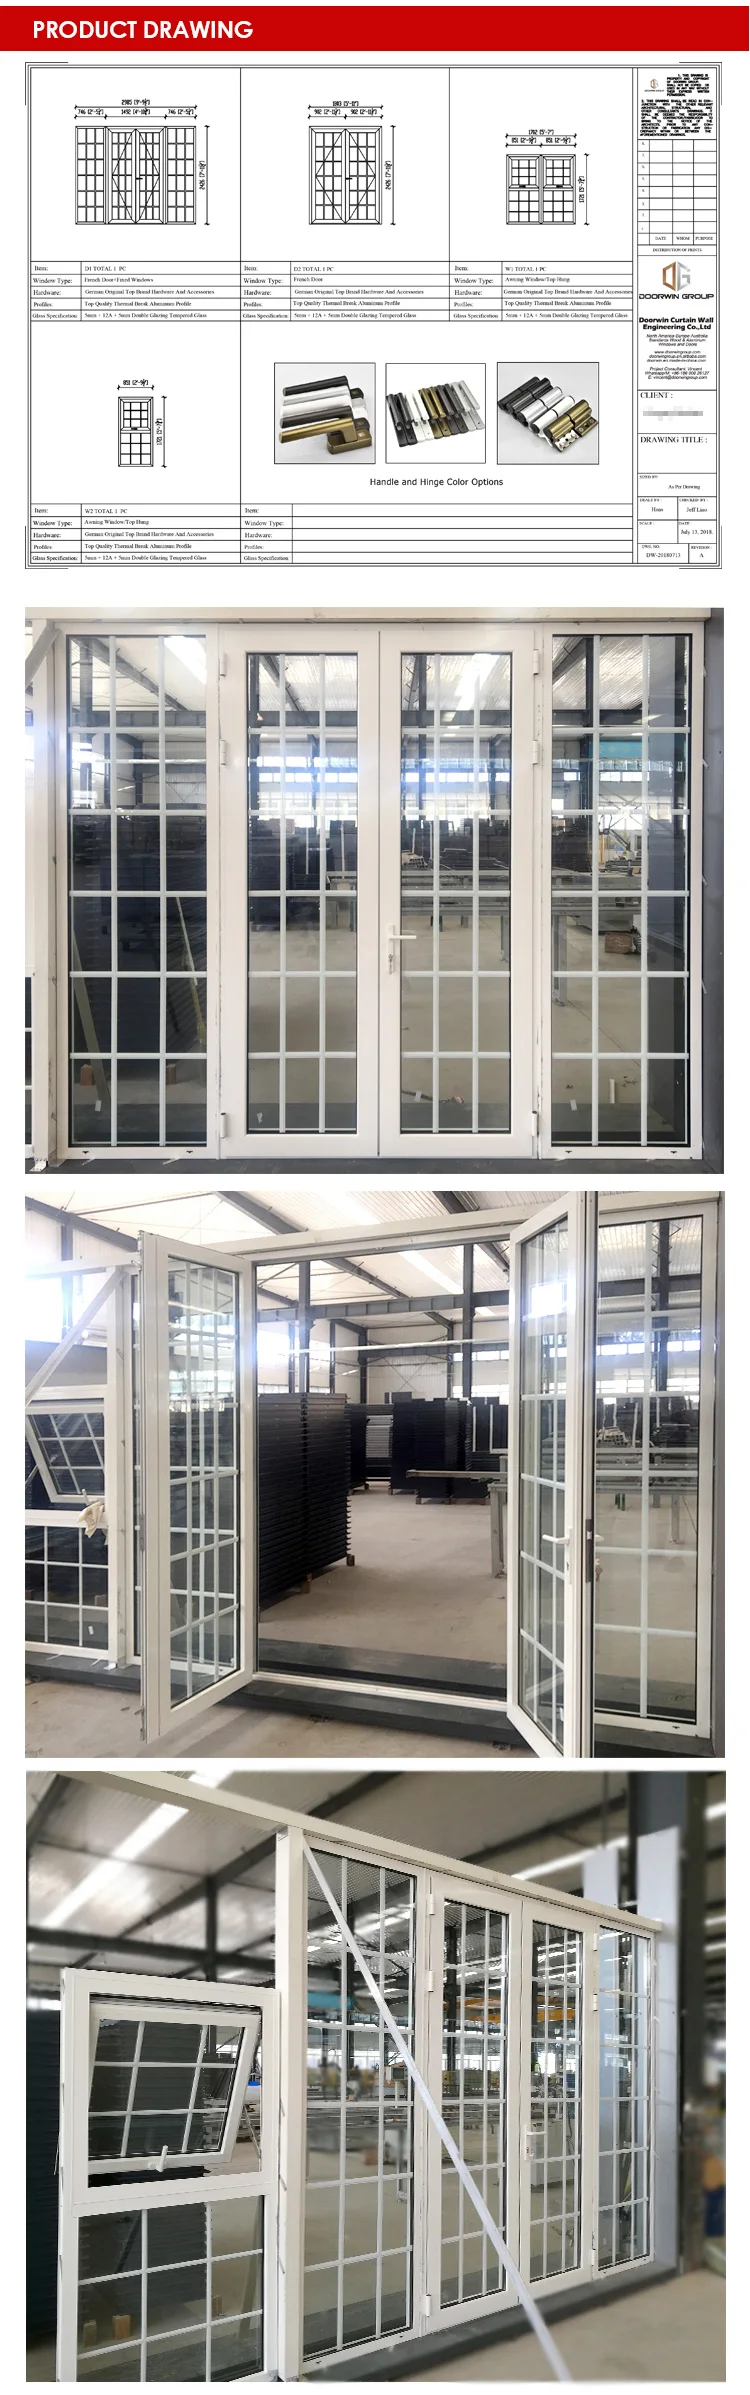 White Powder Coating Aluminium Awning Casement Windows With Grill Inside Glass For Modern Houses